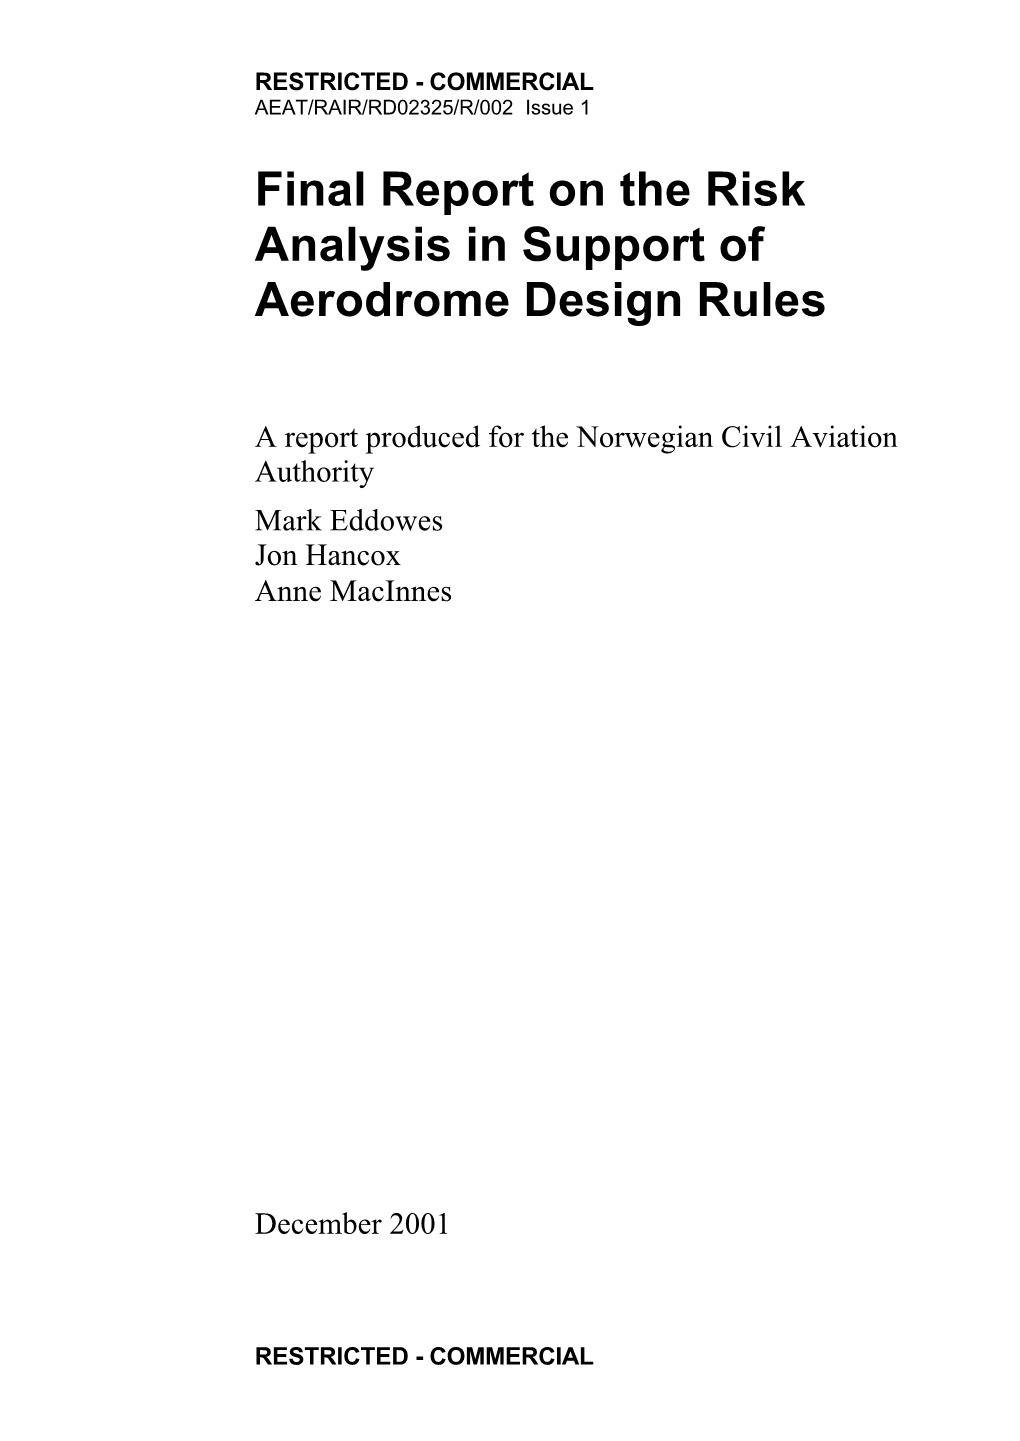 Final Report on the Risk Analysis in Support of Aerodrome Design Rules